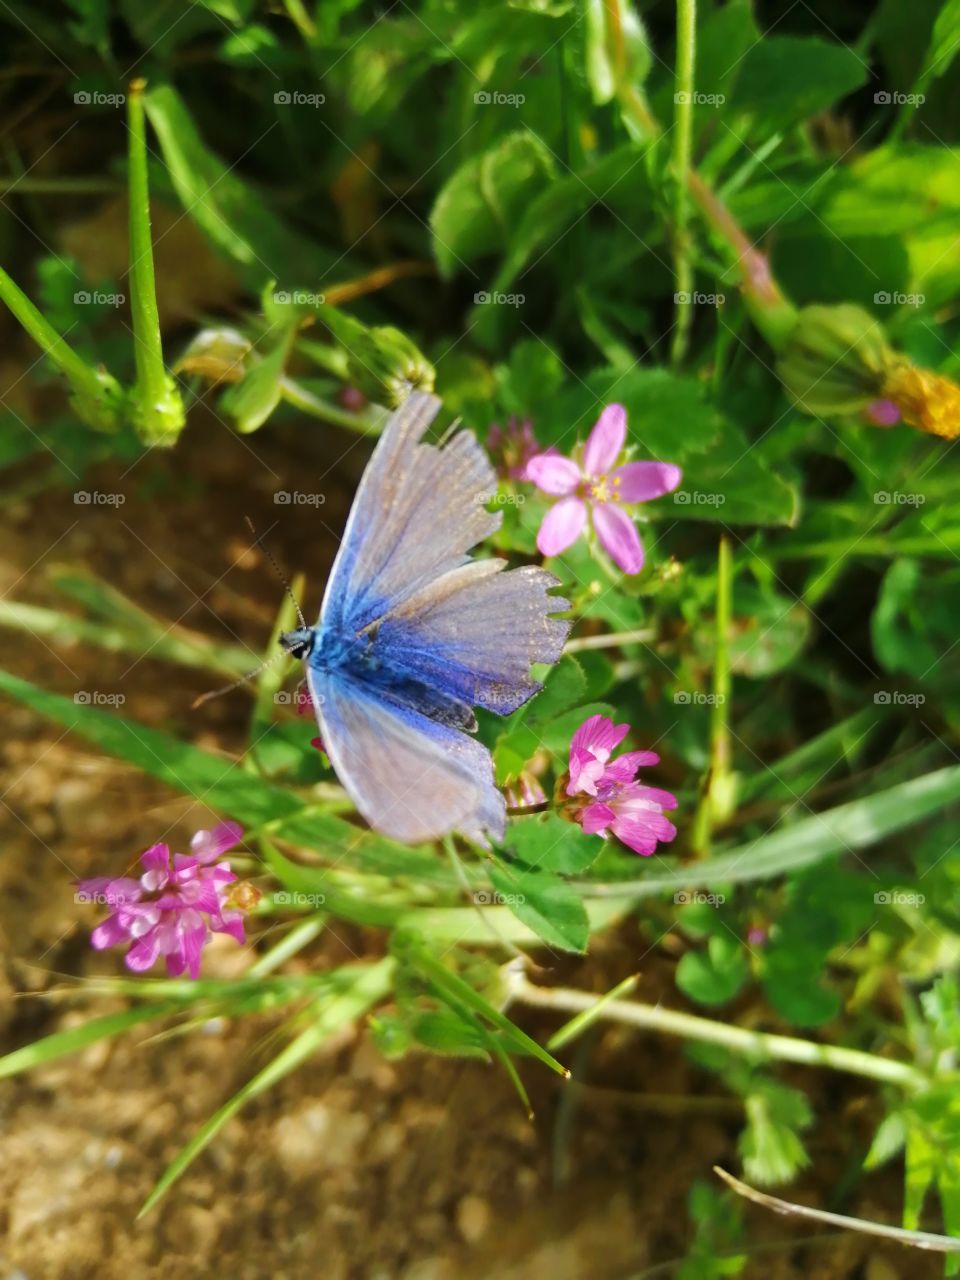 The blue butterfly in nature and a shot over the flowers